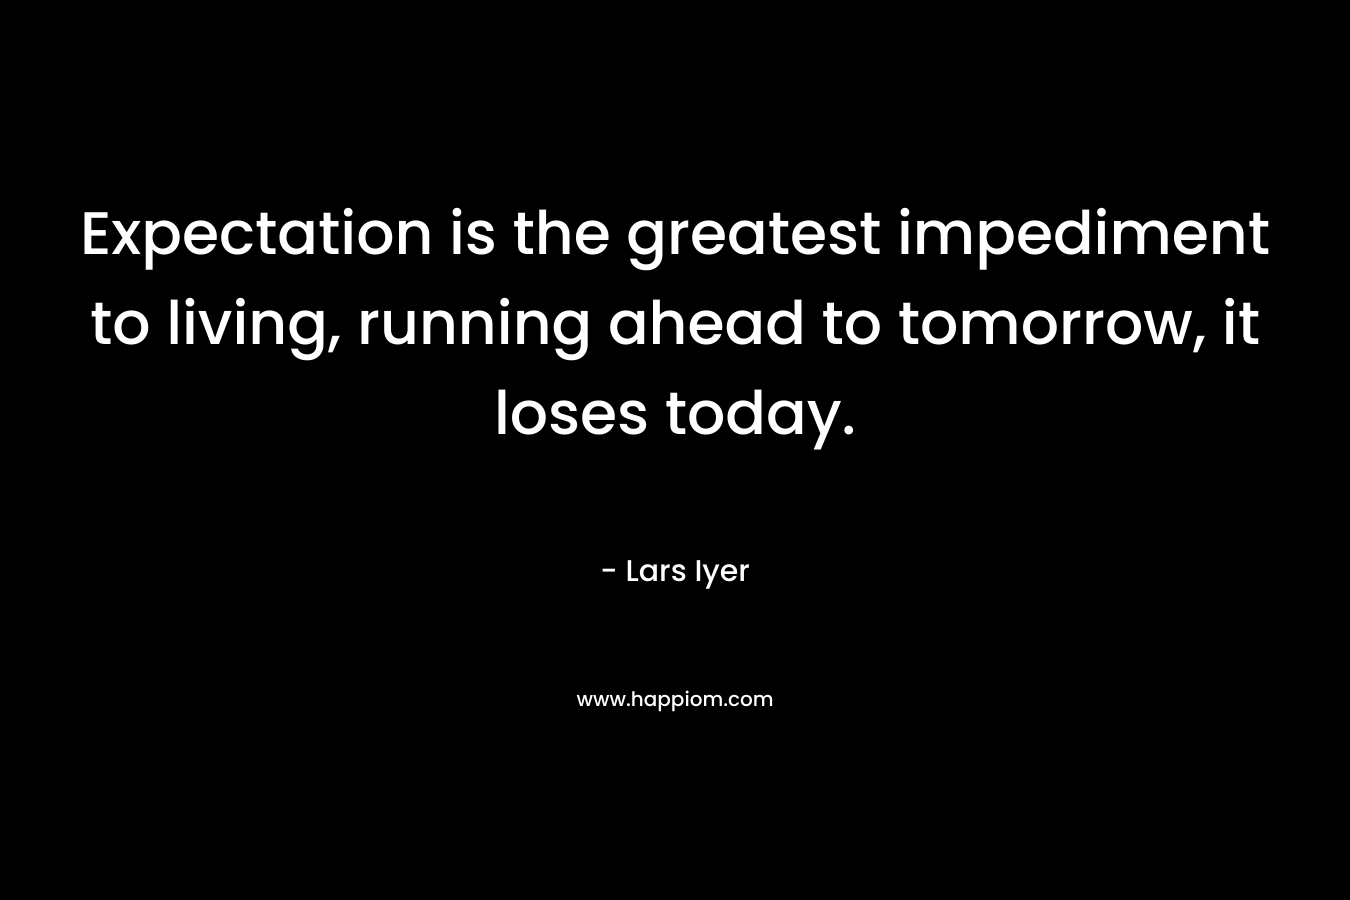 Expectation is the greatest impediment to living, running ahead to tomorrow, it loses today.